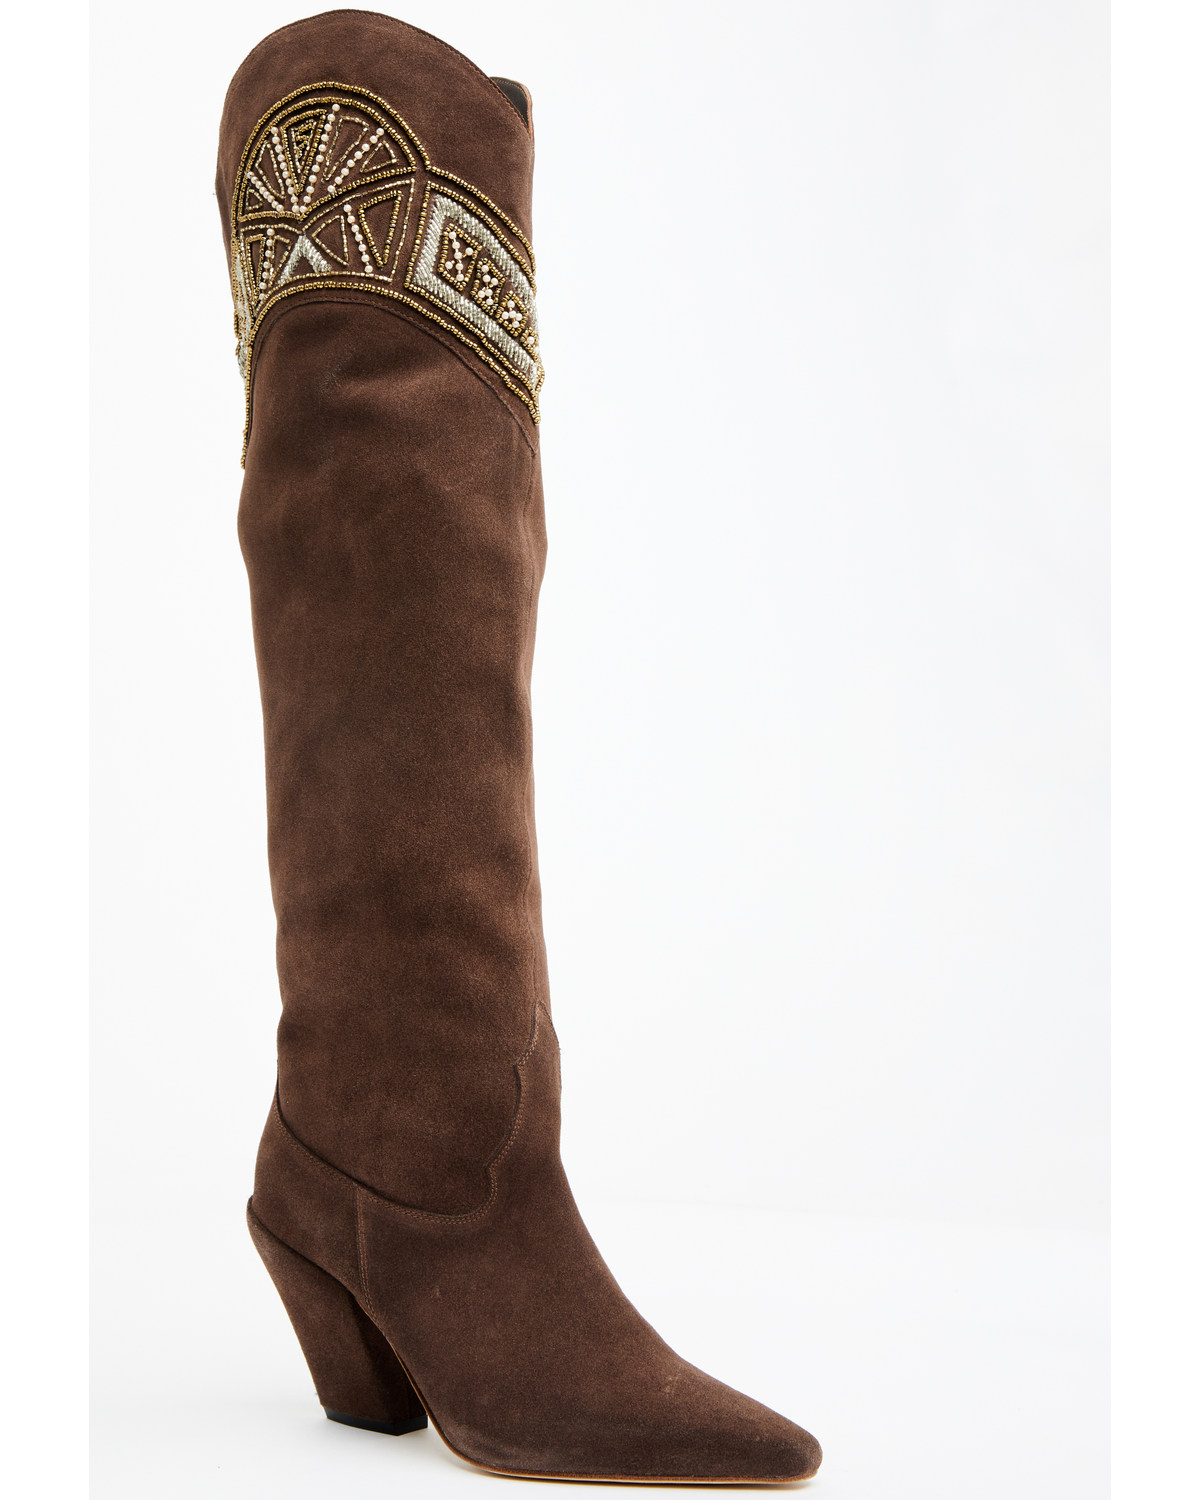 Wonderwest Women's Giselle Tall Western Boots - Pointed Toe